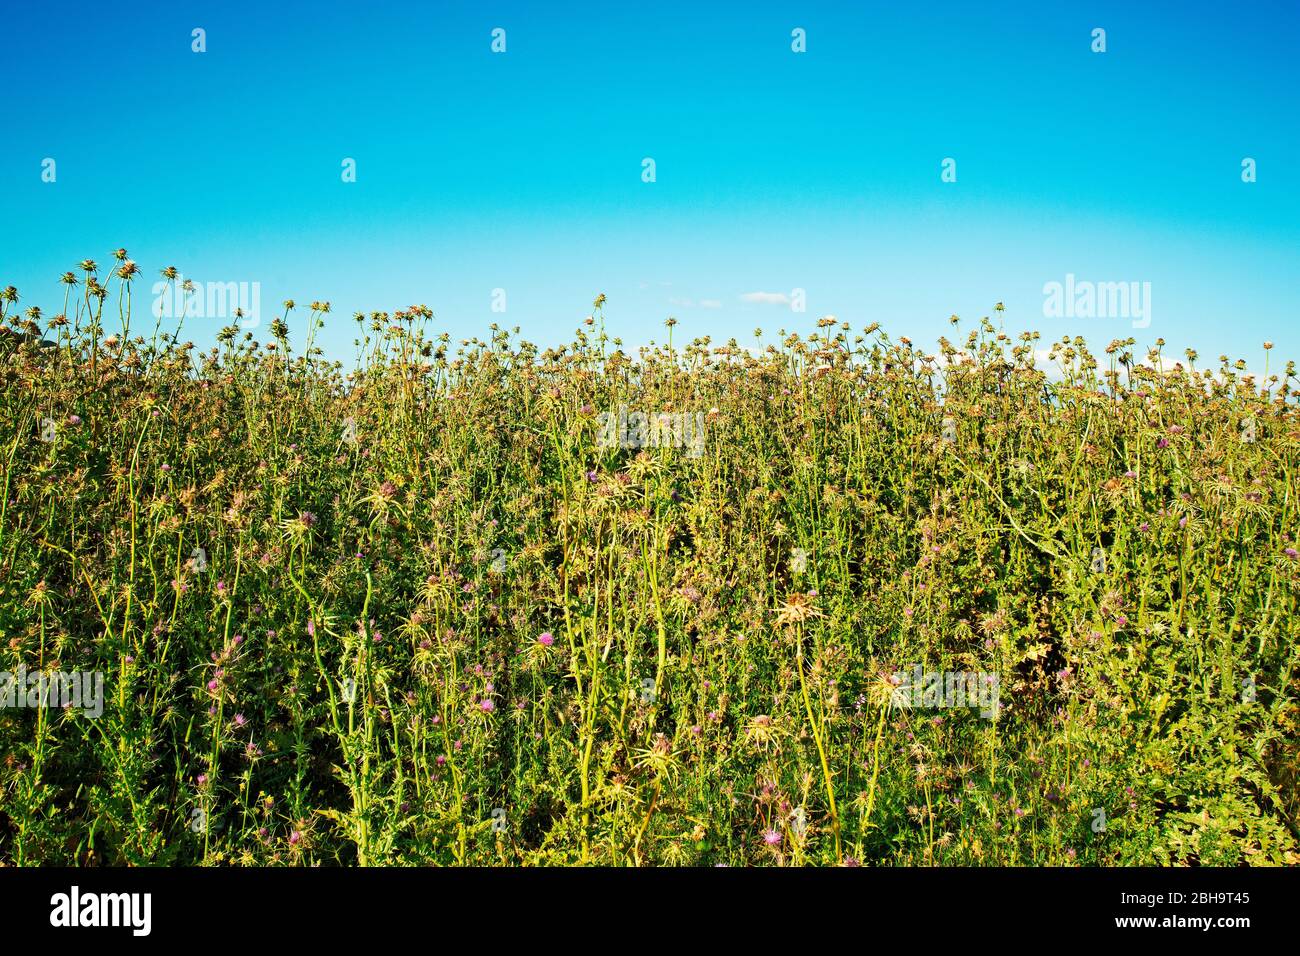 Wild nature landscape with plants and blue sky Stock Photo